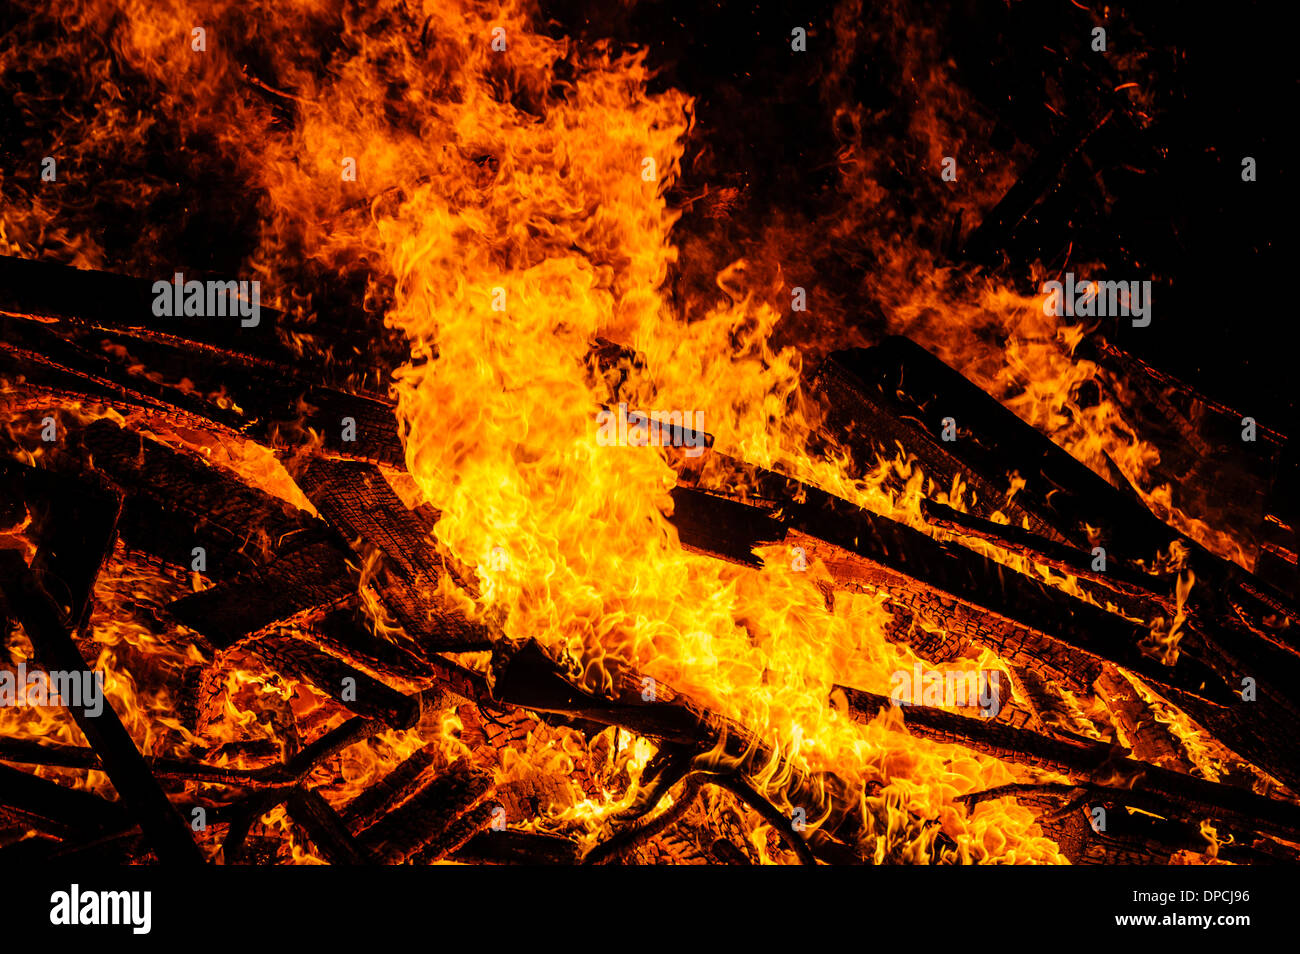 The Biggar hogmanay bonfire - lit in the town every hogmanay (New Years Eve). Stock Photo